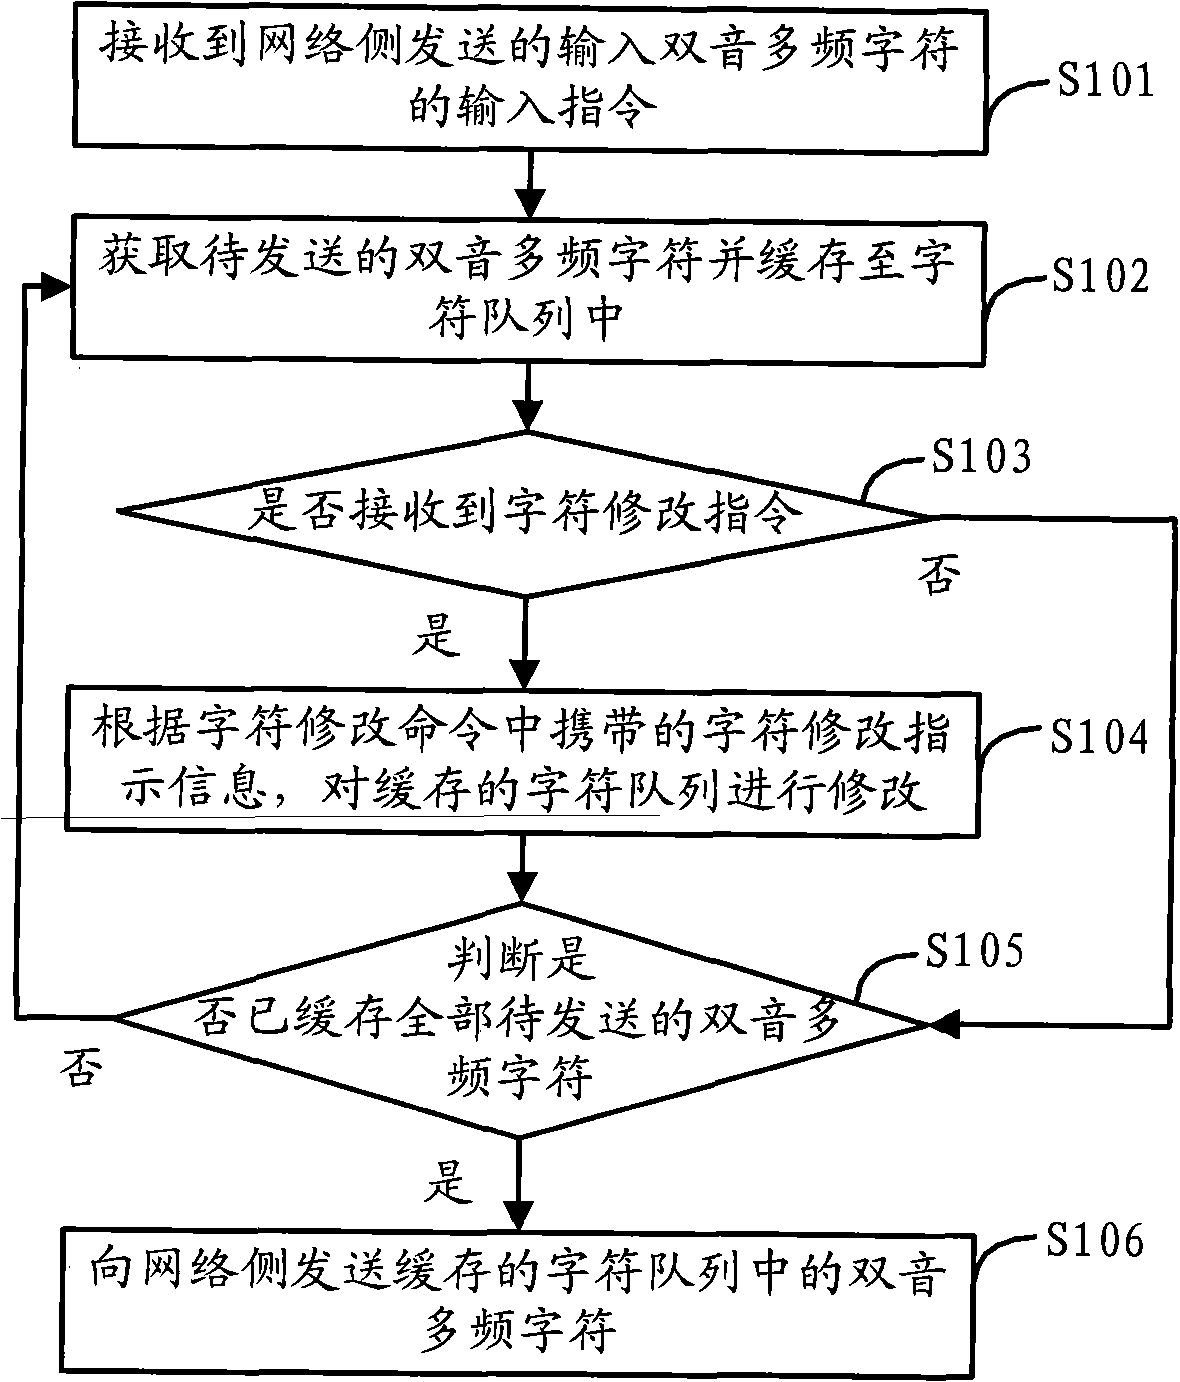 Dual-tone multi-frequency signal sending method and device